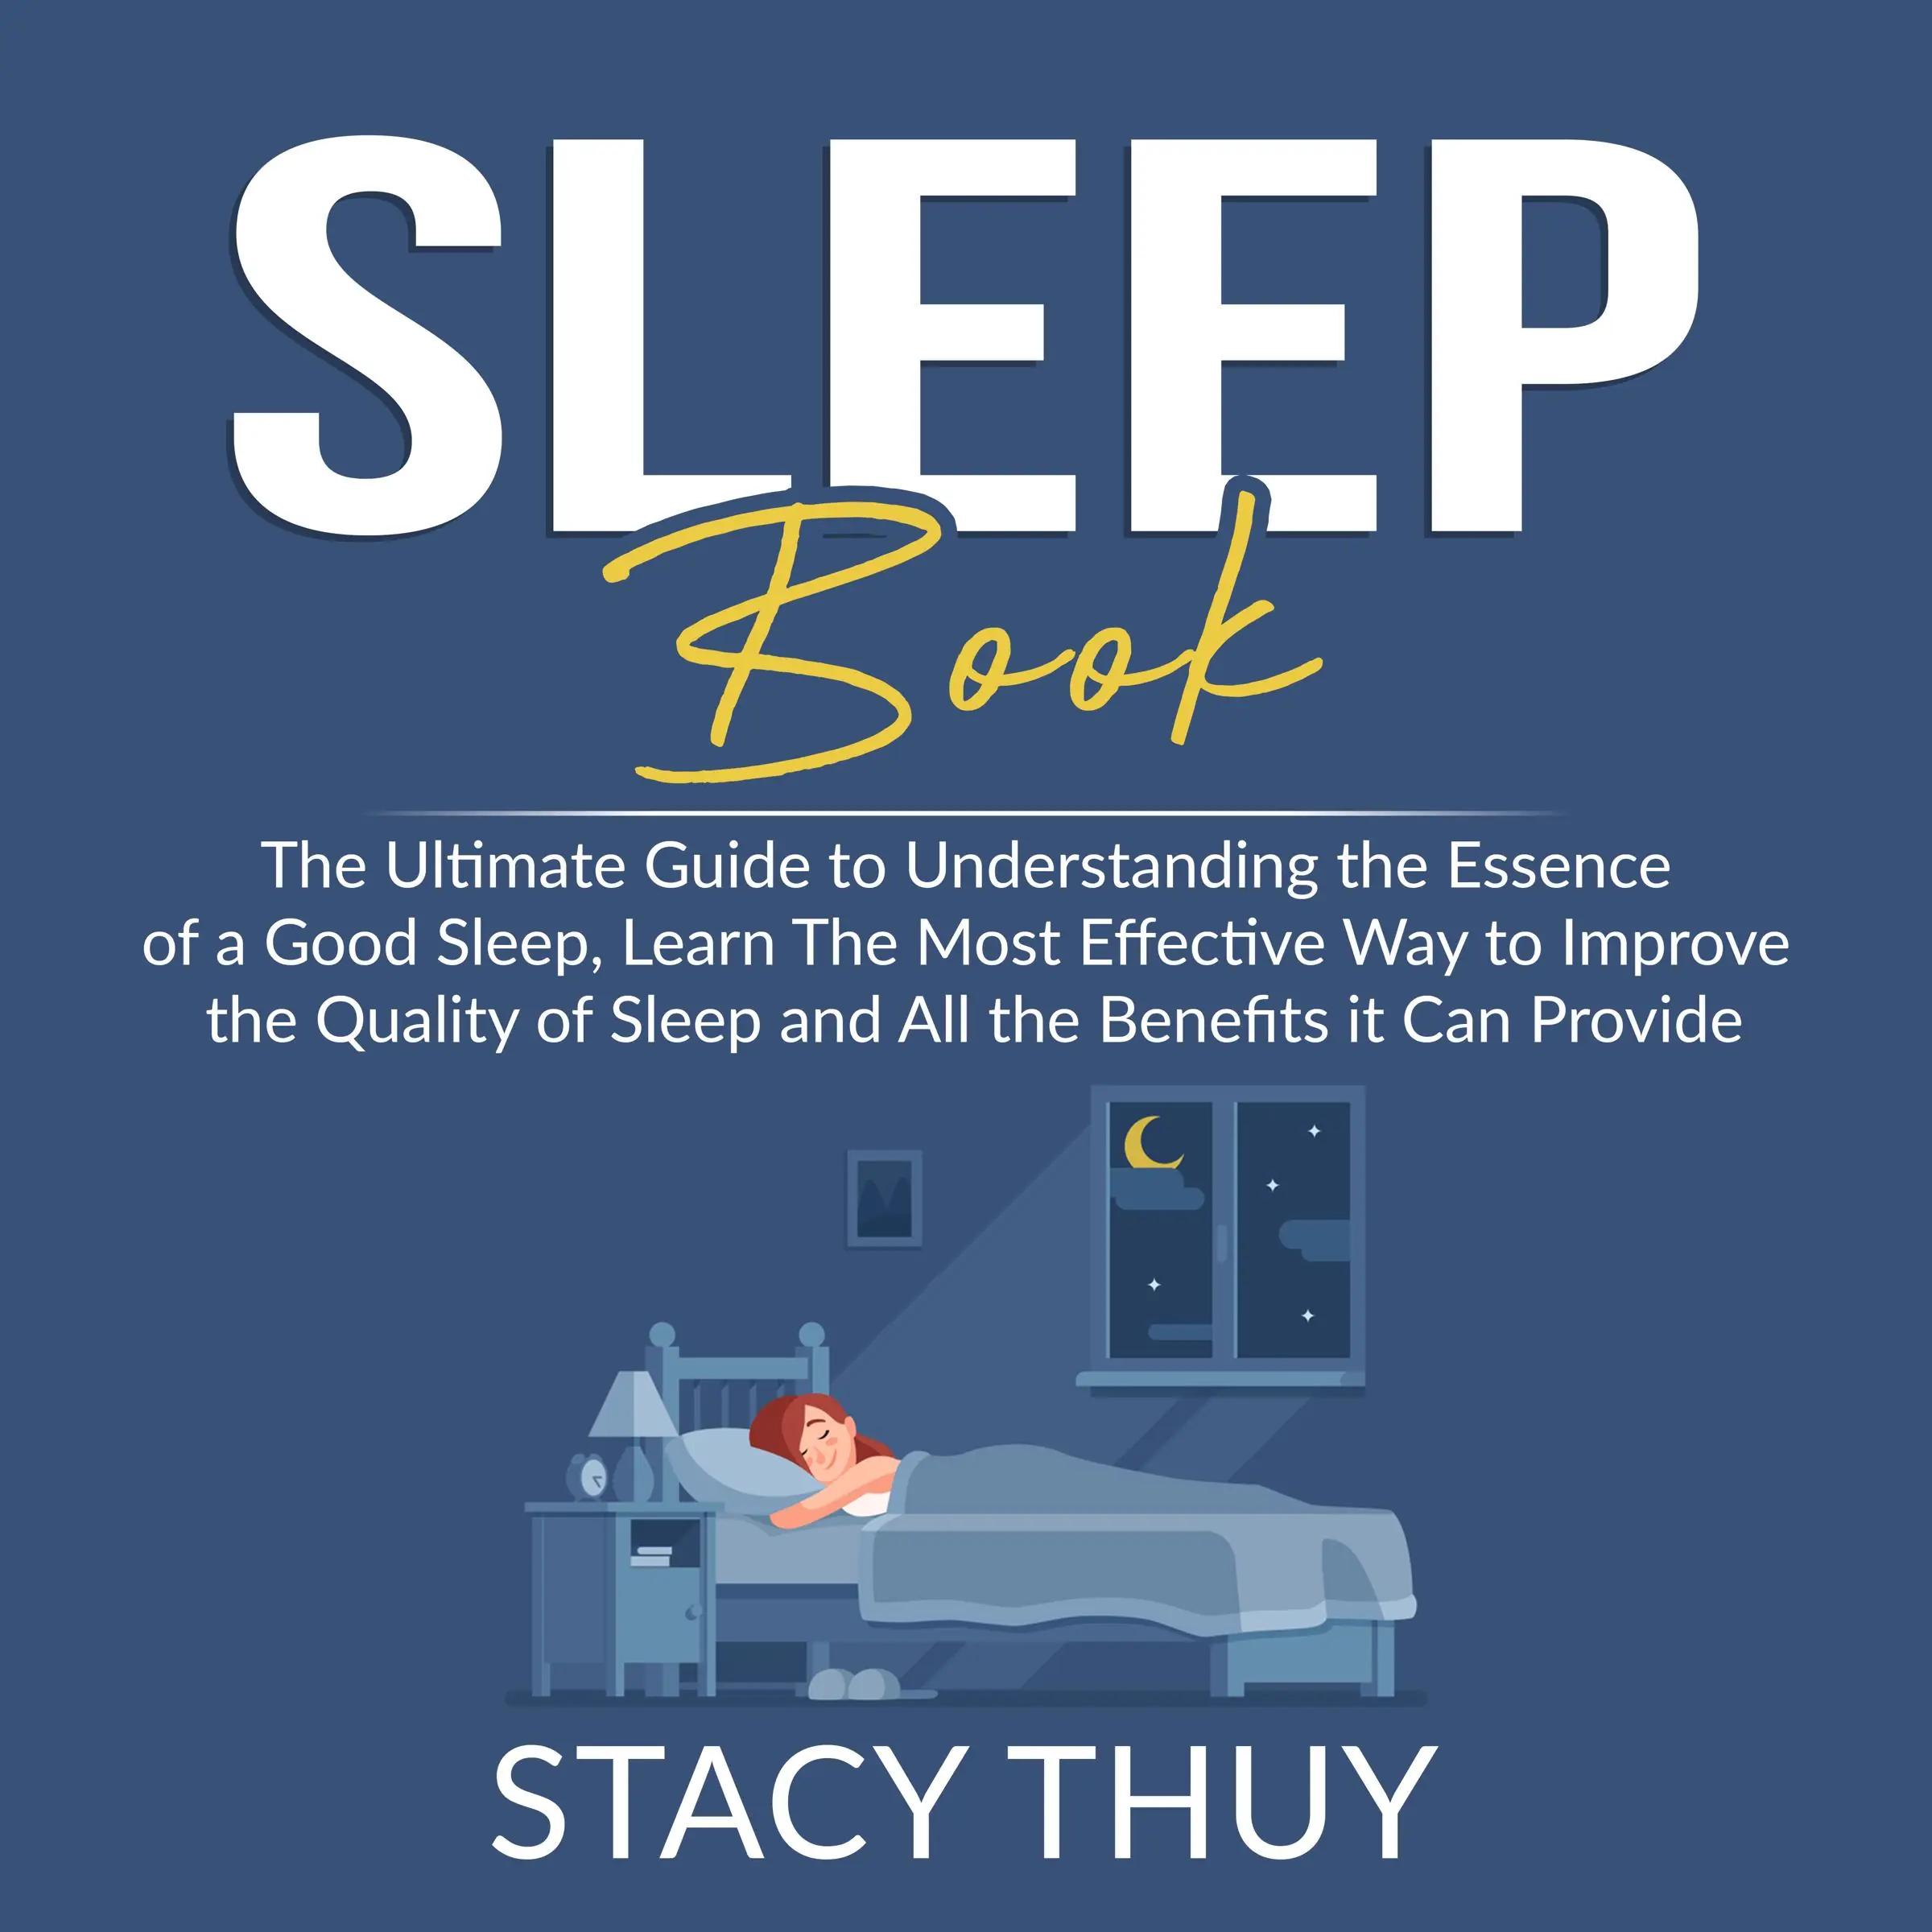 Sleep Book: The Ultimate Guide to Understanding the Essence of a Good Sleep, Learn The Most Effective Way to Improve the Quality of Sleep and All the Benefits it Can Provide Audiobook by Stacy Thuy